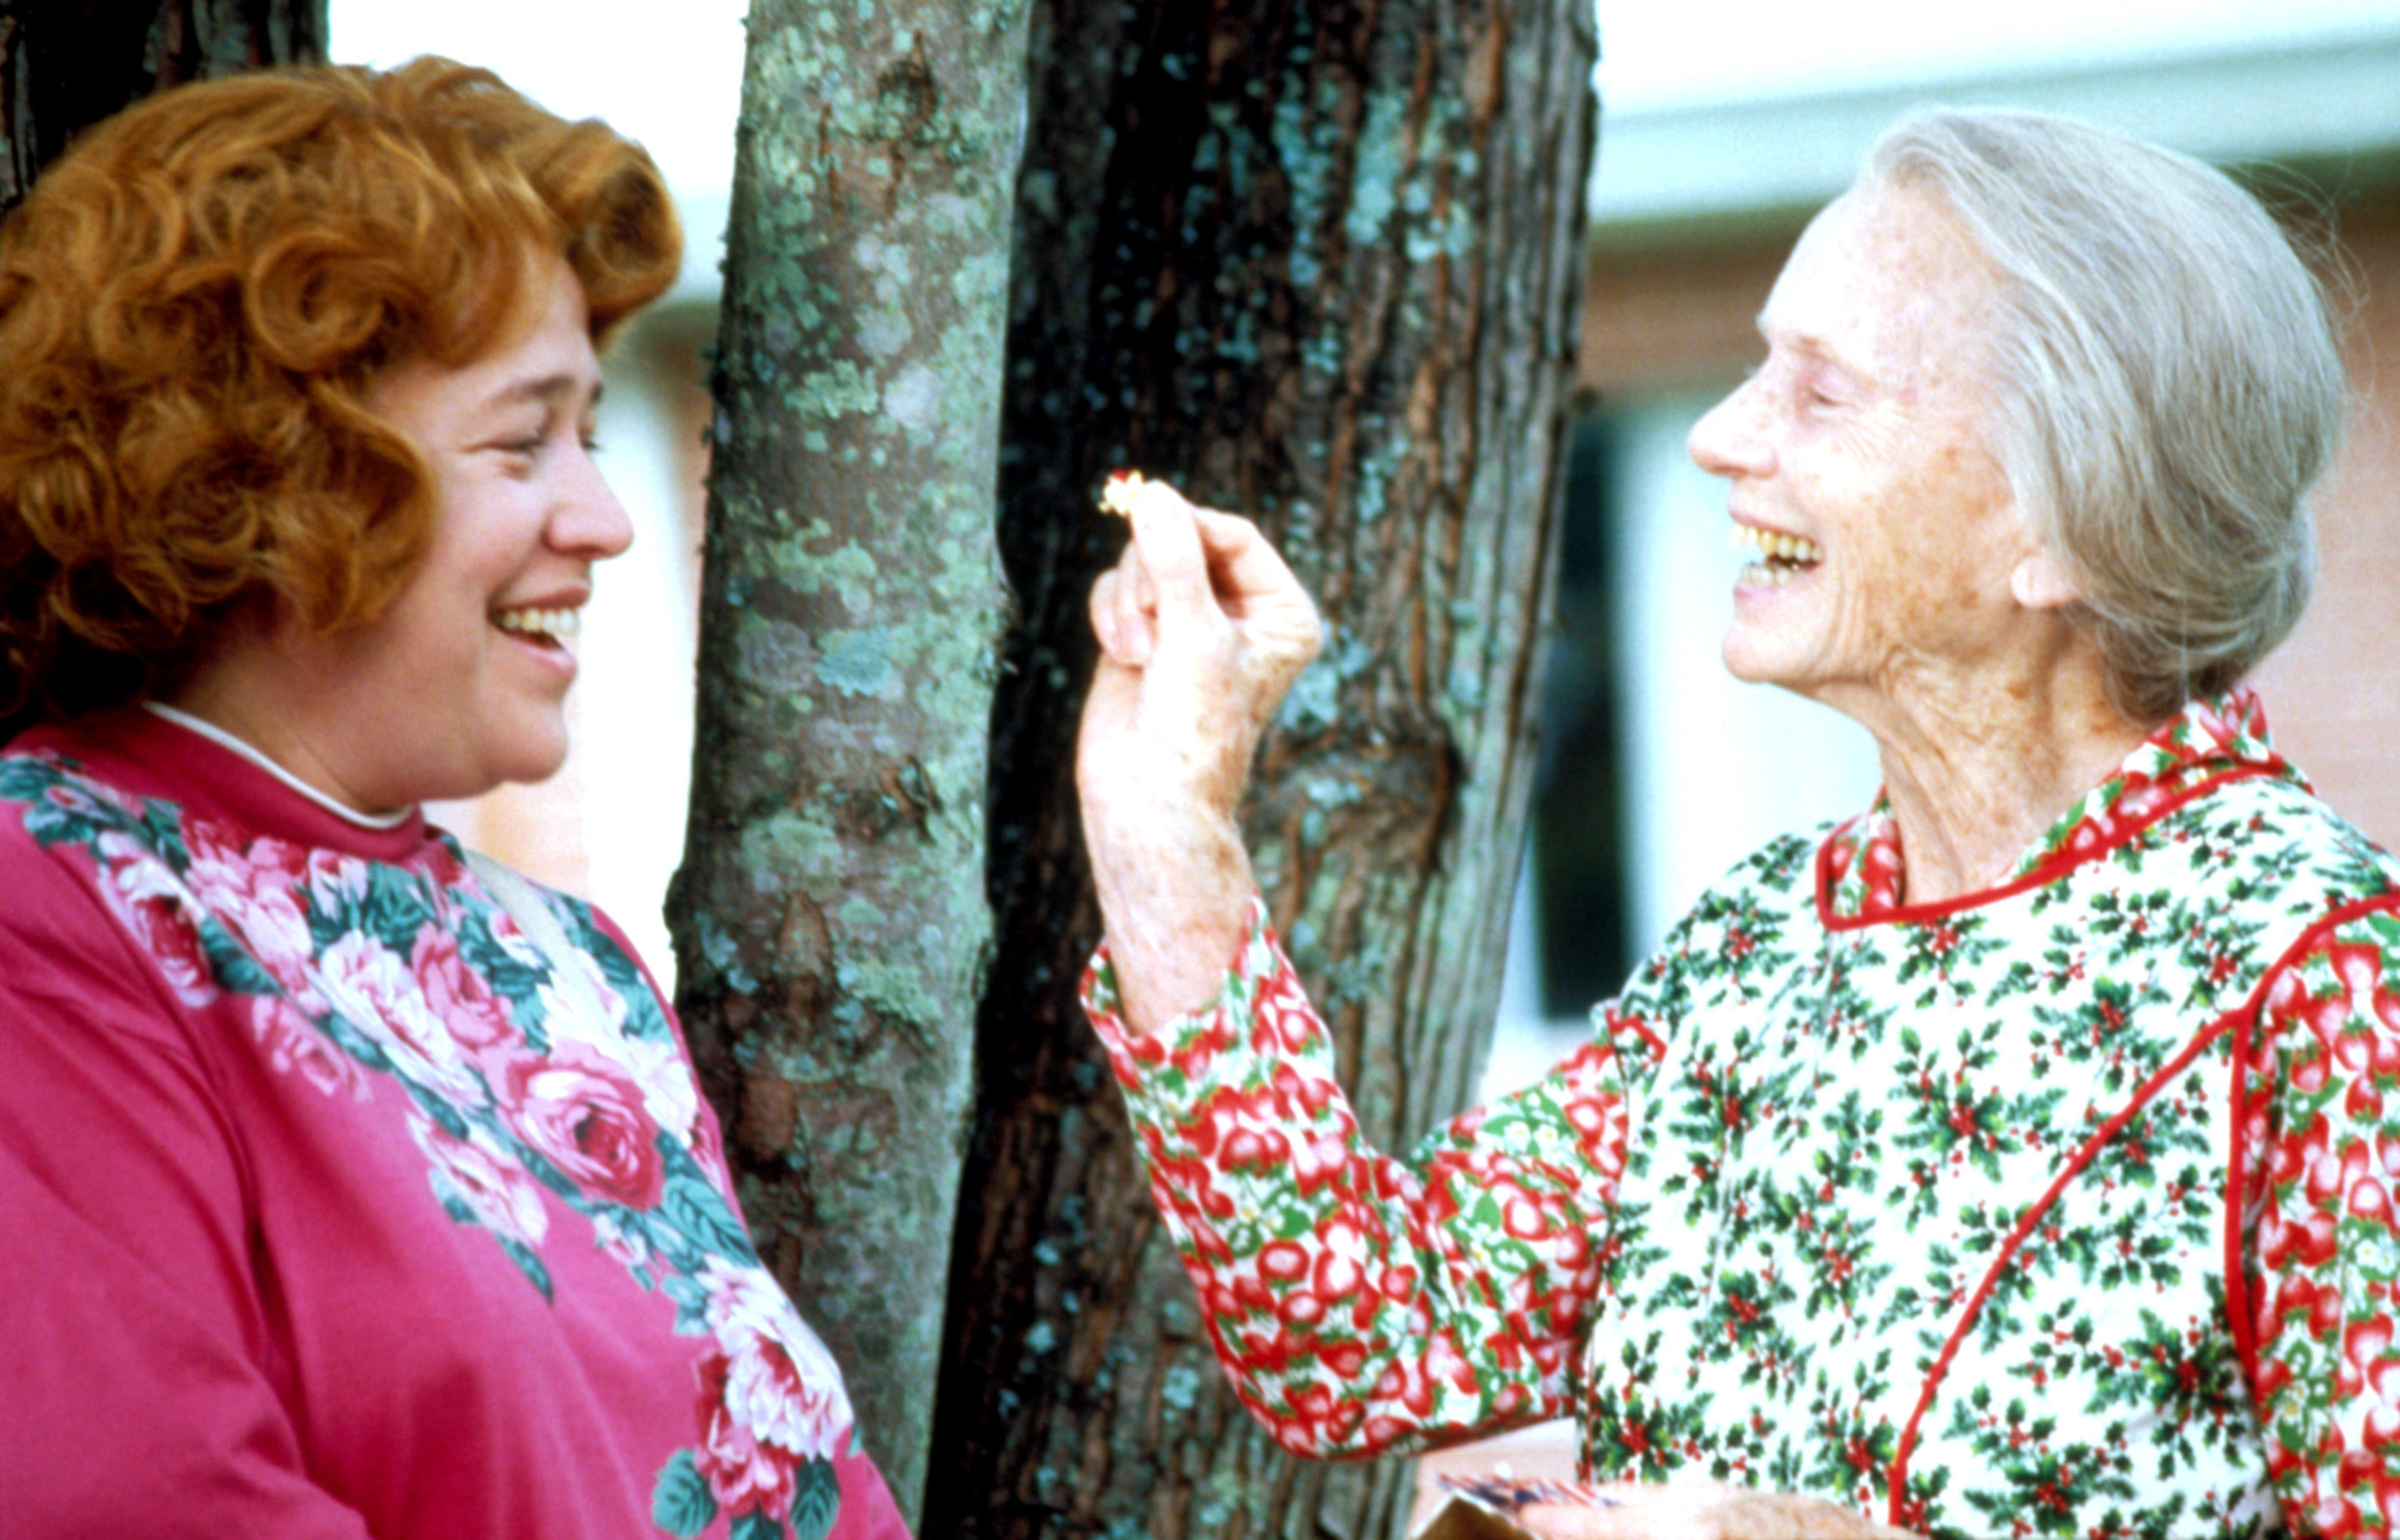 Kathy Bates stands near a tree and smiles as Evelyn as Jessica Tandy as Ninny pinches something in between her fingers